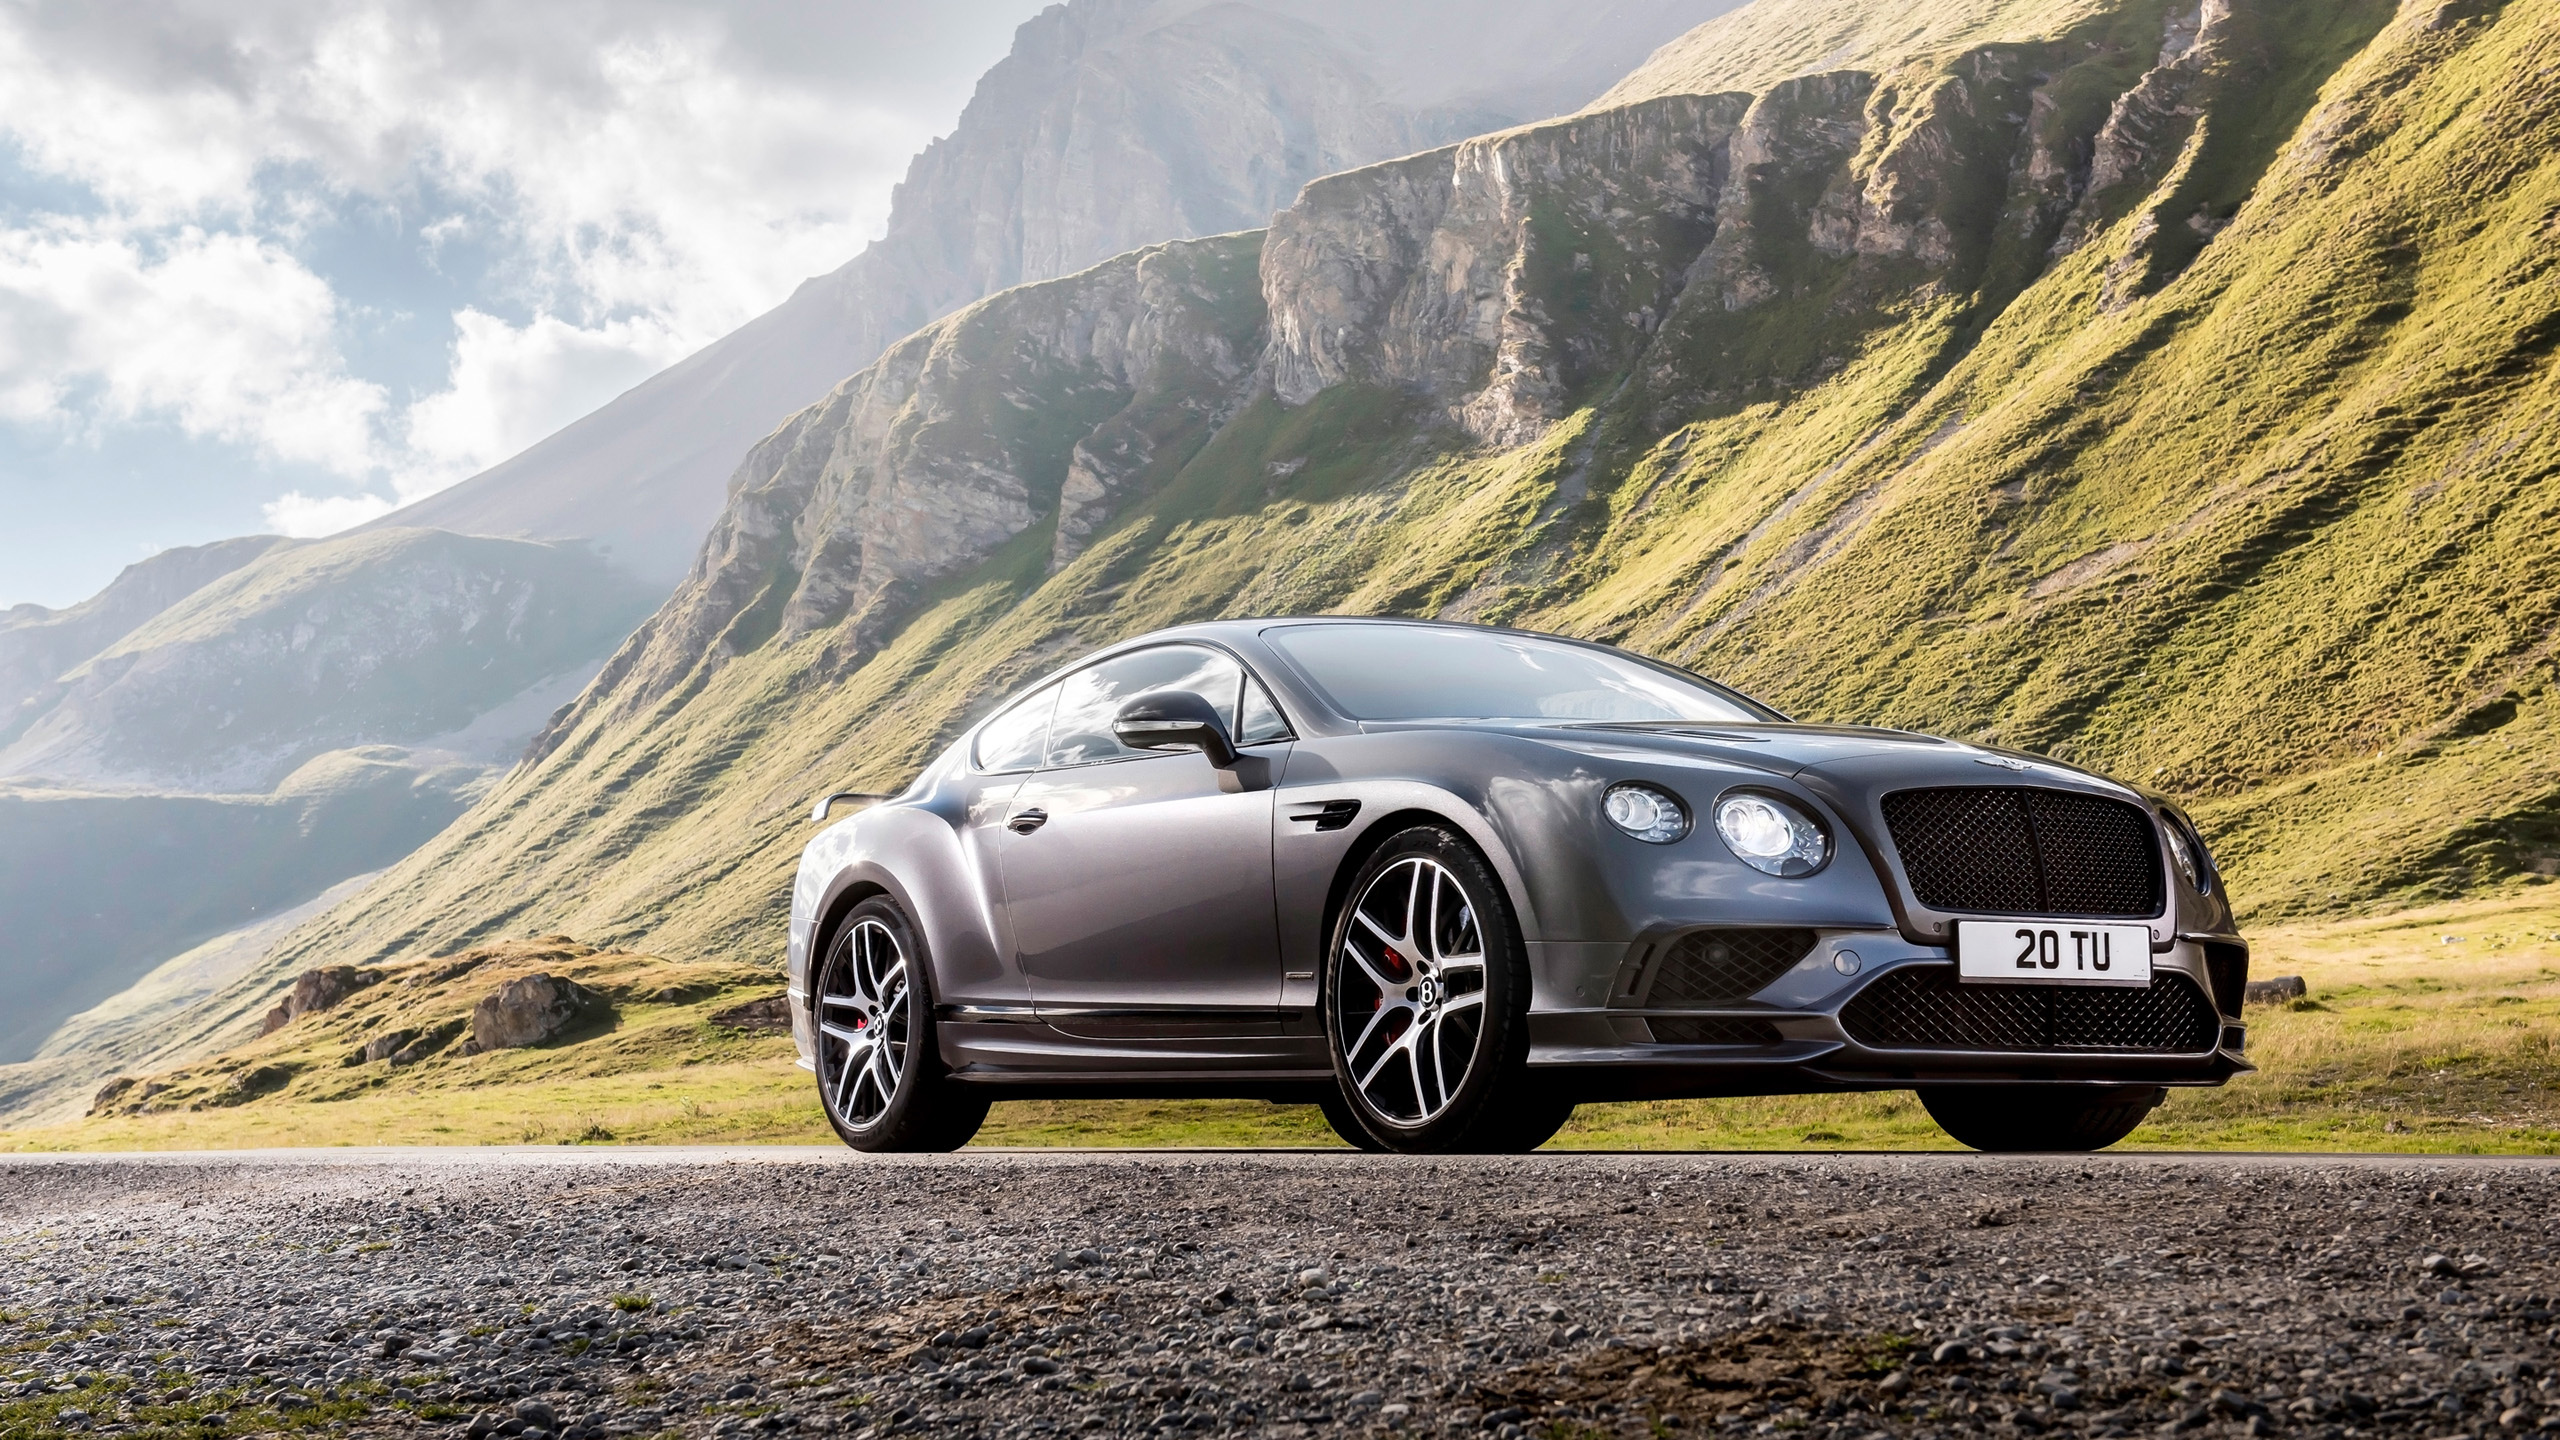 2017 Bentley Continental Supersports 3 Wallpaper Hd Car Wallpapers Id 7339